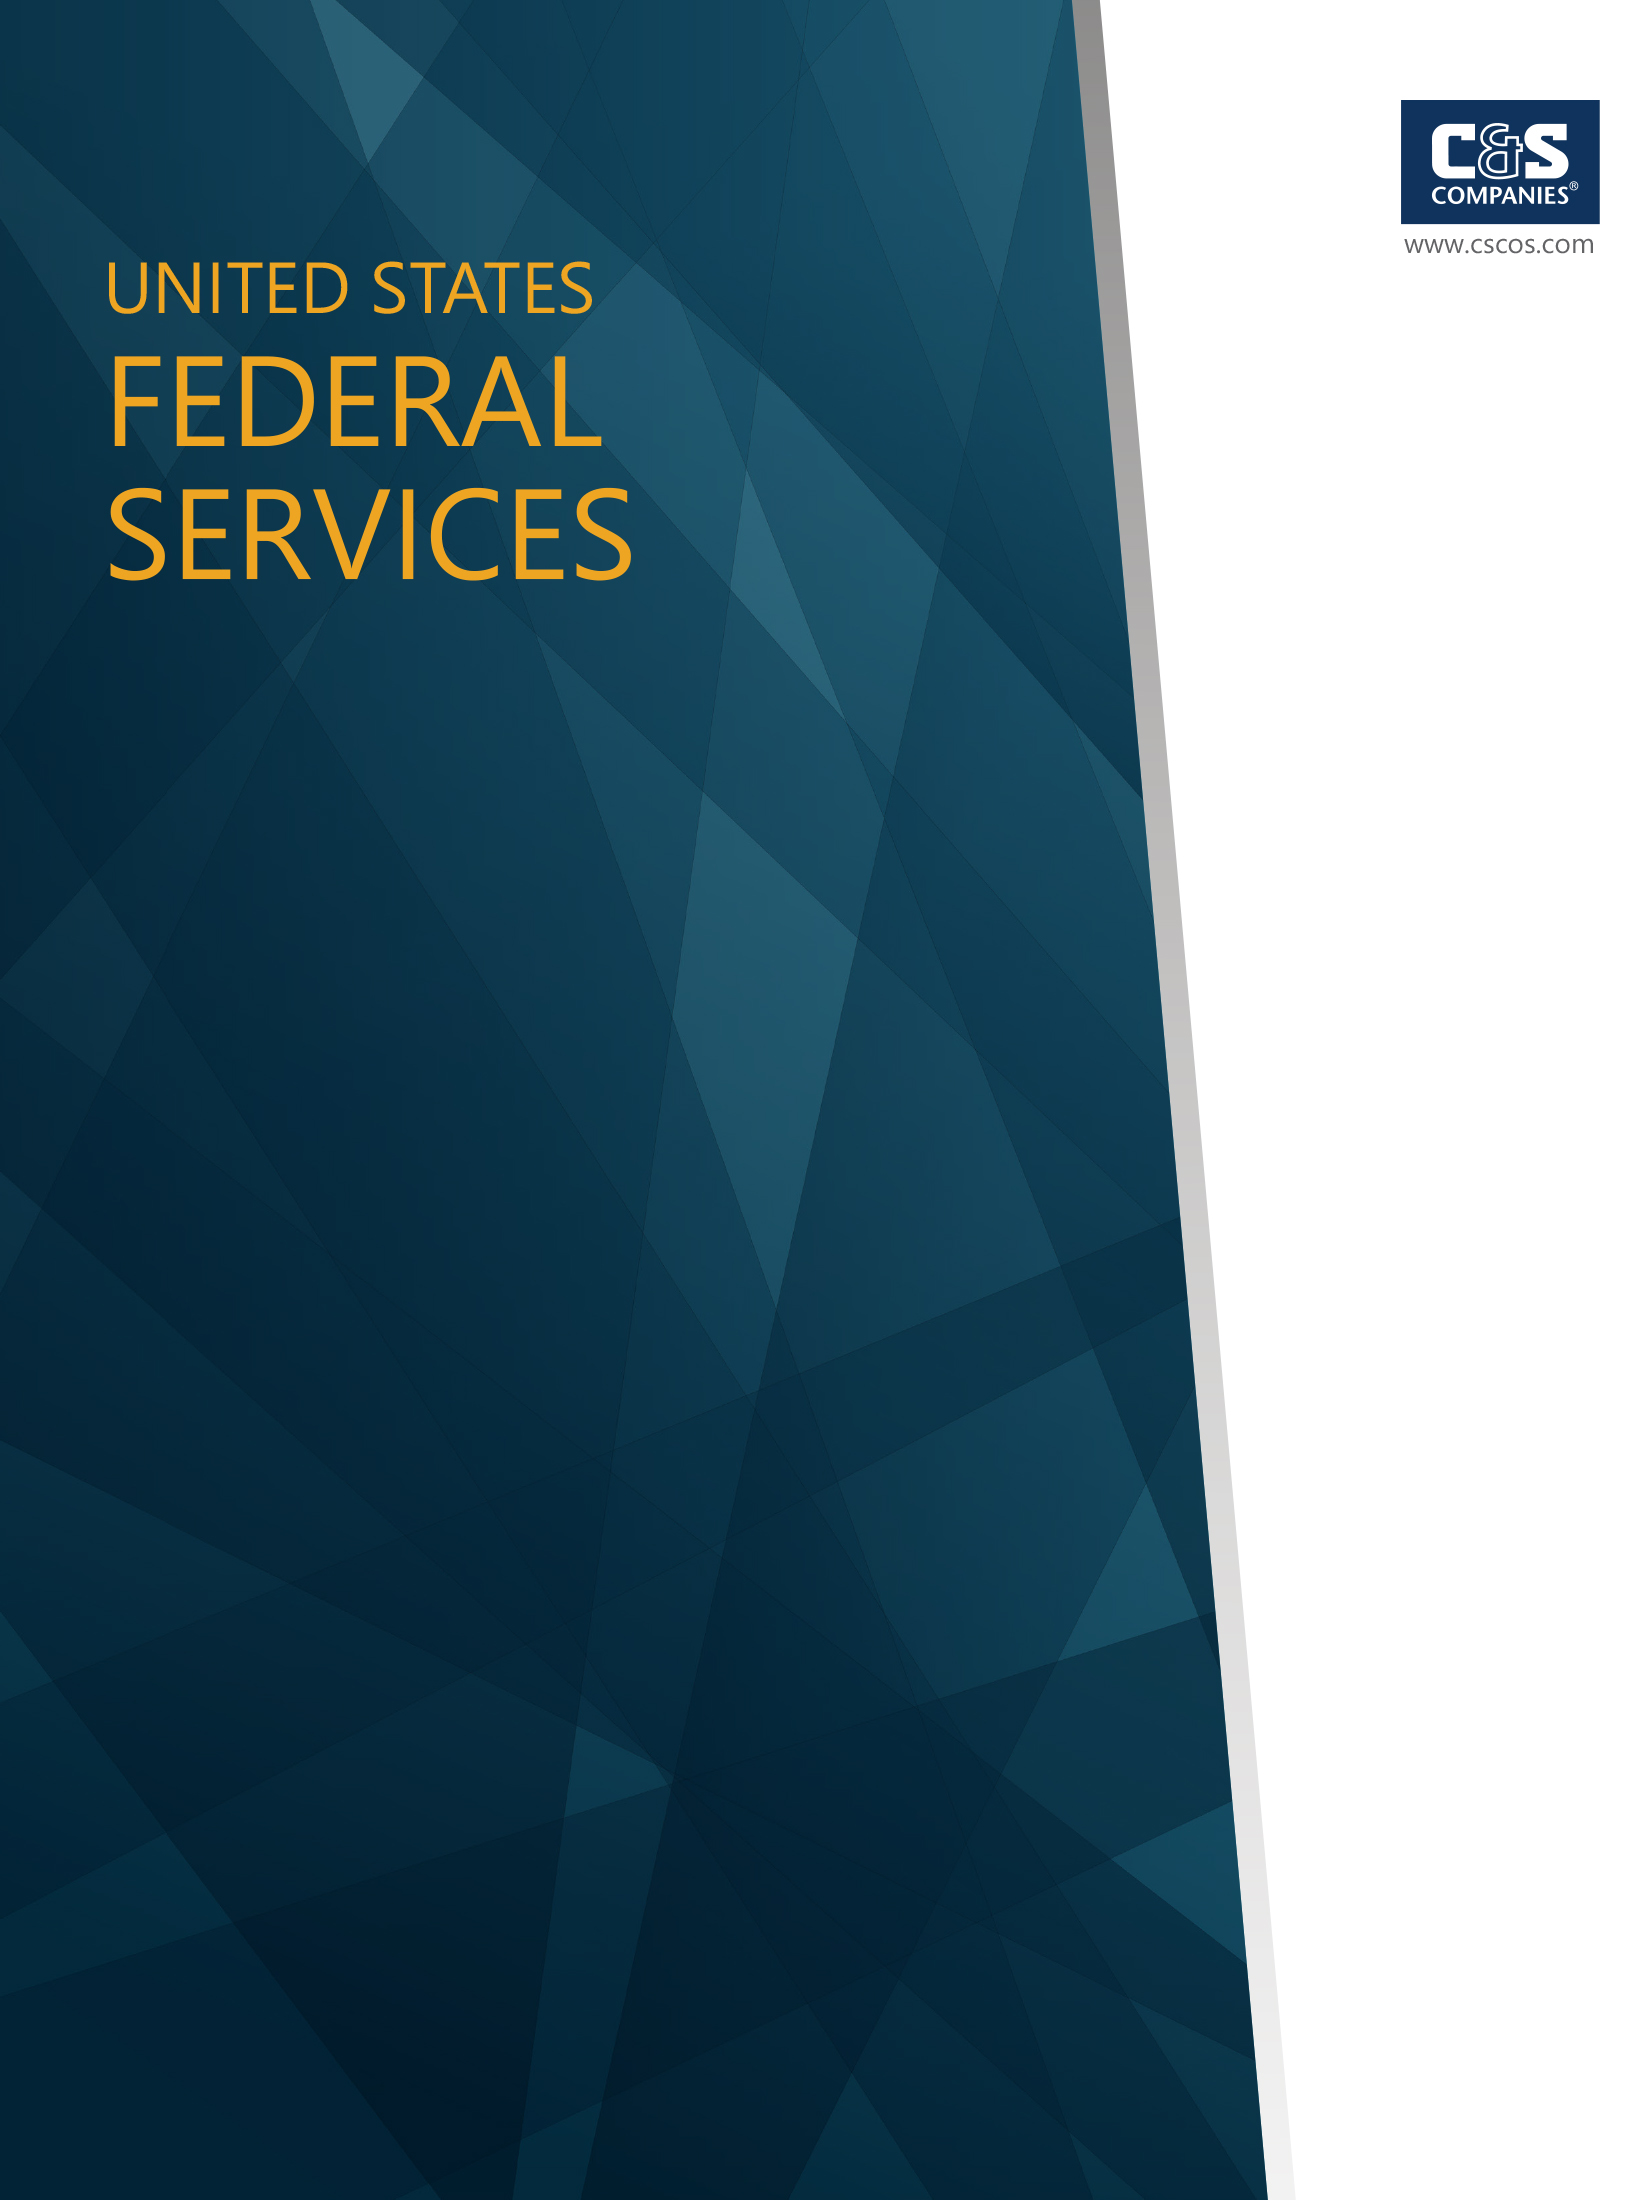 Federal Services Brochure